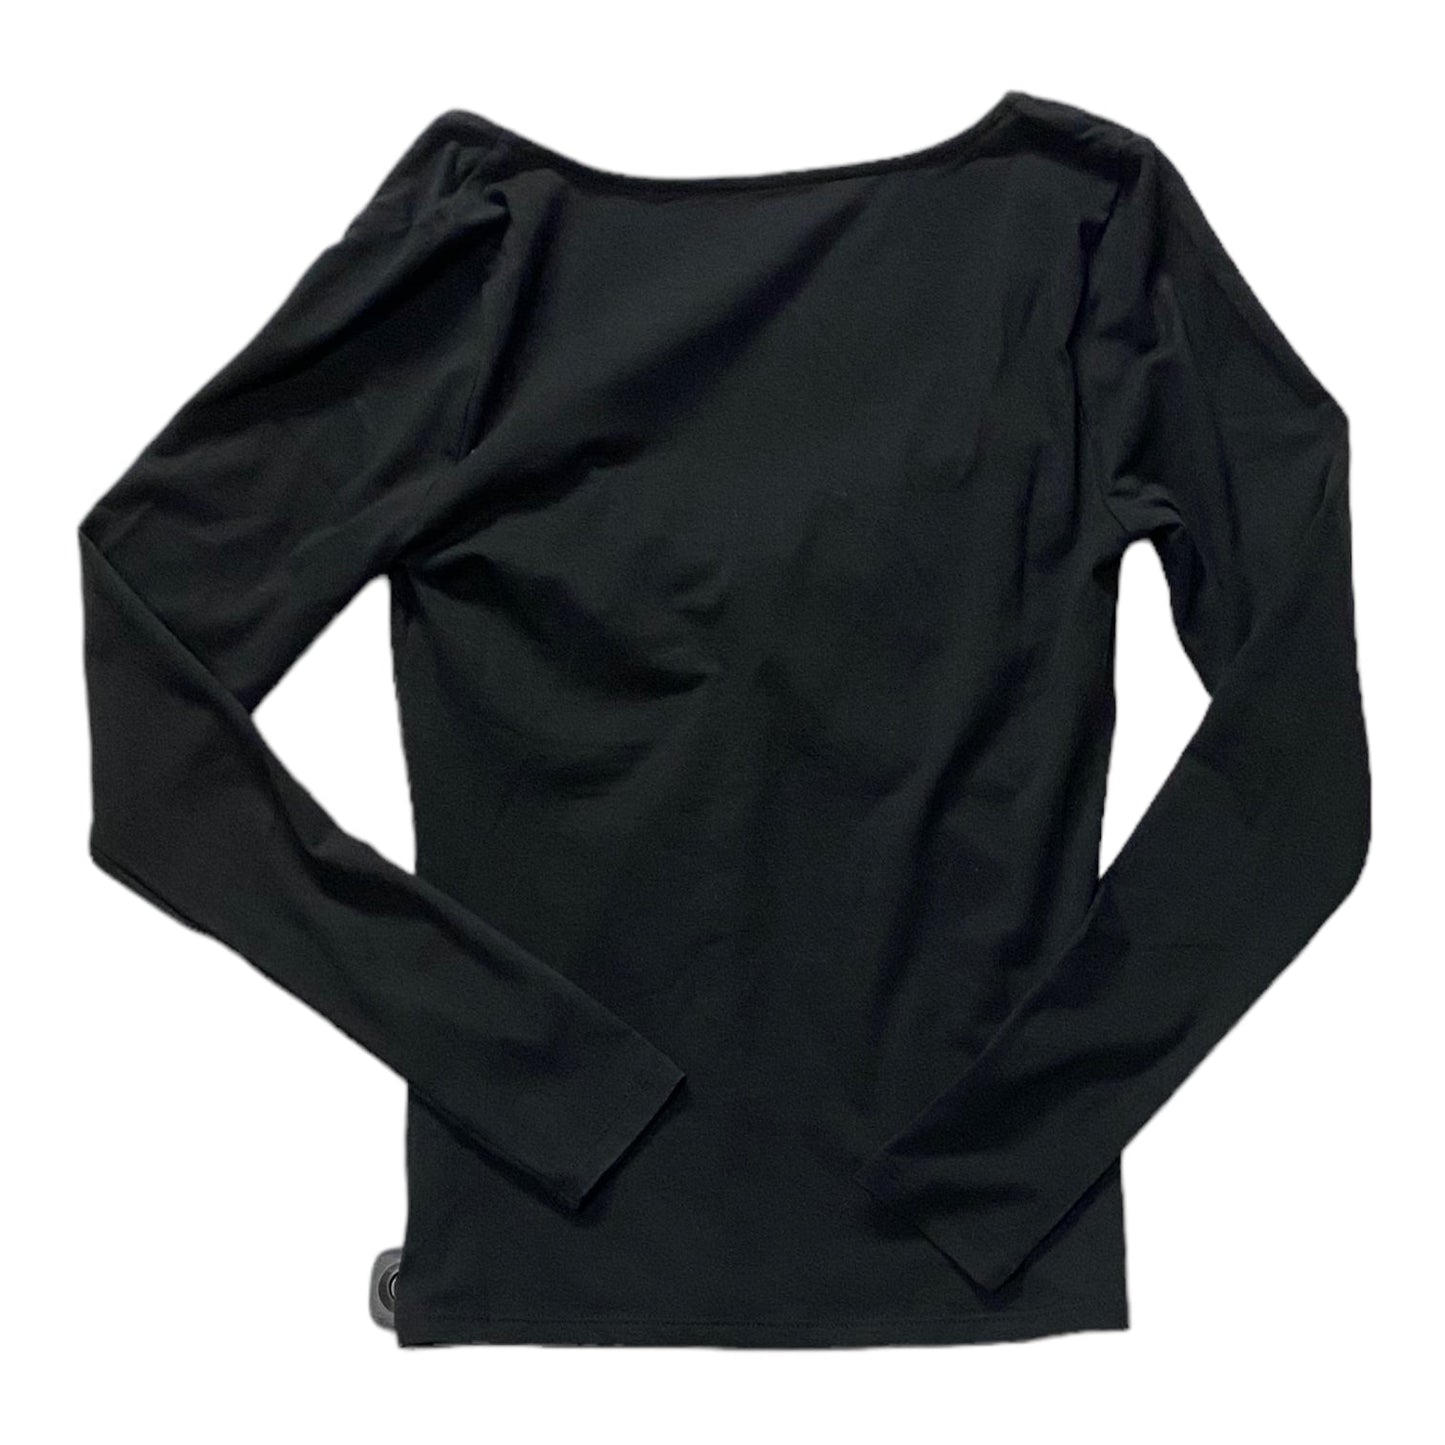 Black Top Long Sleeve Old Navy, Size Xs